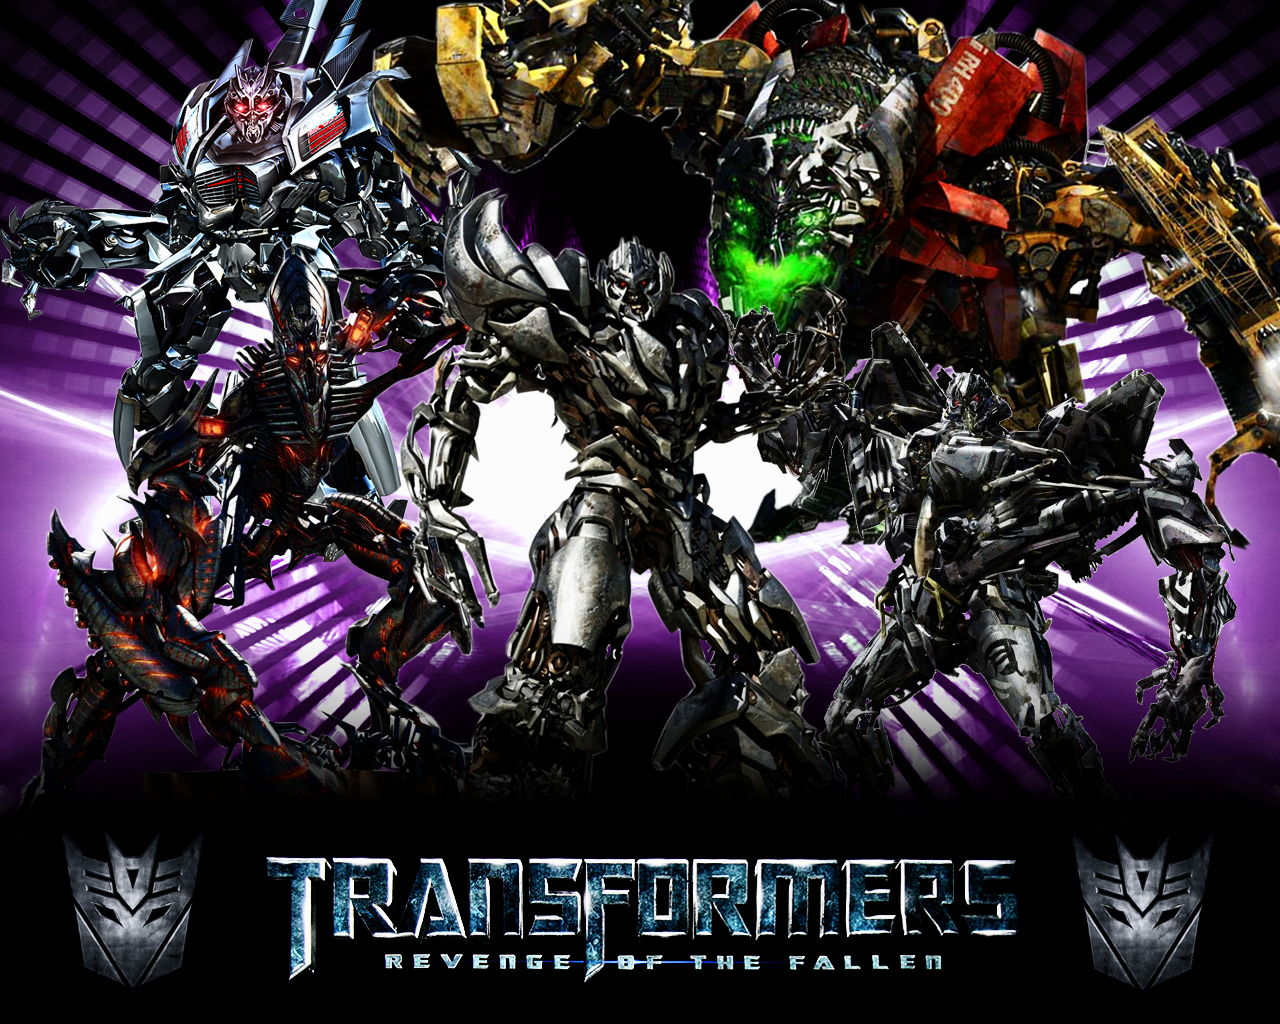 Transformers Decepticons Wallpaper For iPhone 2 Revenge Of The Fallen Decepticons Wallpaper & Background Download